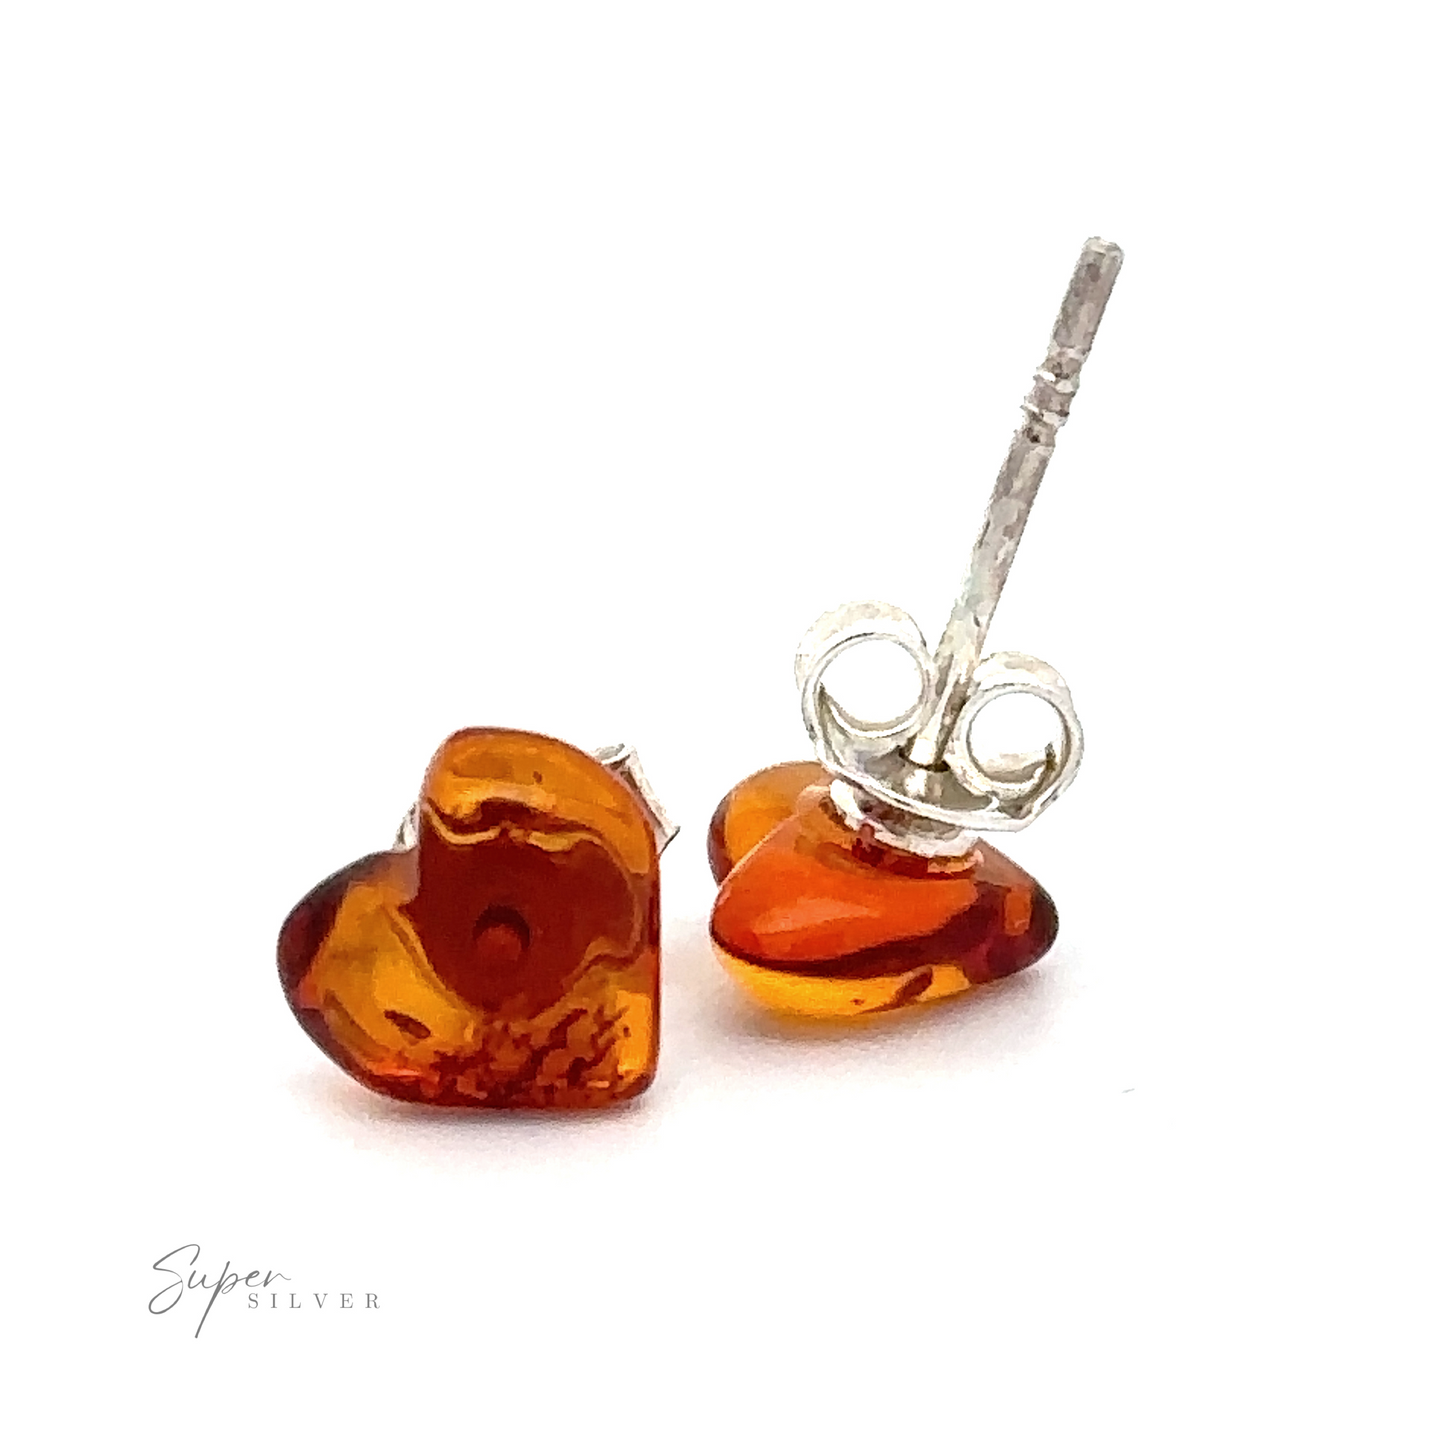 
                  
                    A pair of Amber Heart Studs made of amber and sterling silver. One earring stands upright while the other lies flat, showcasing their intricate design against a plain white background.
                  
                